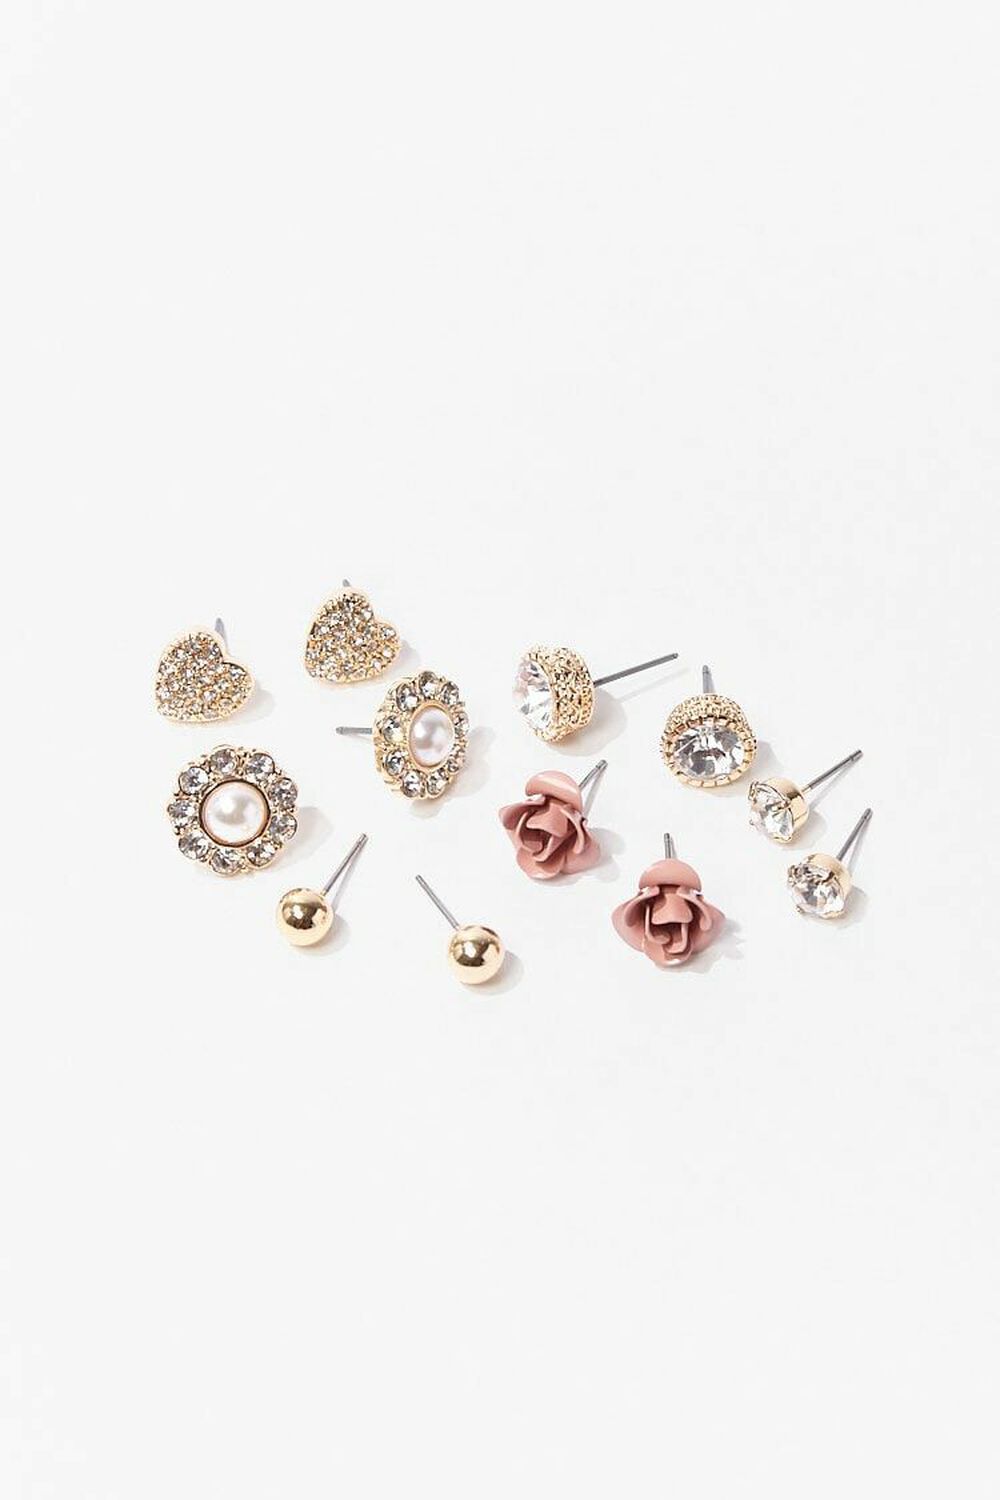 GOLD/PINK Assorted Stud Earring Set, image 1